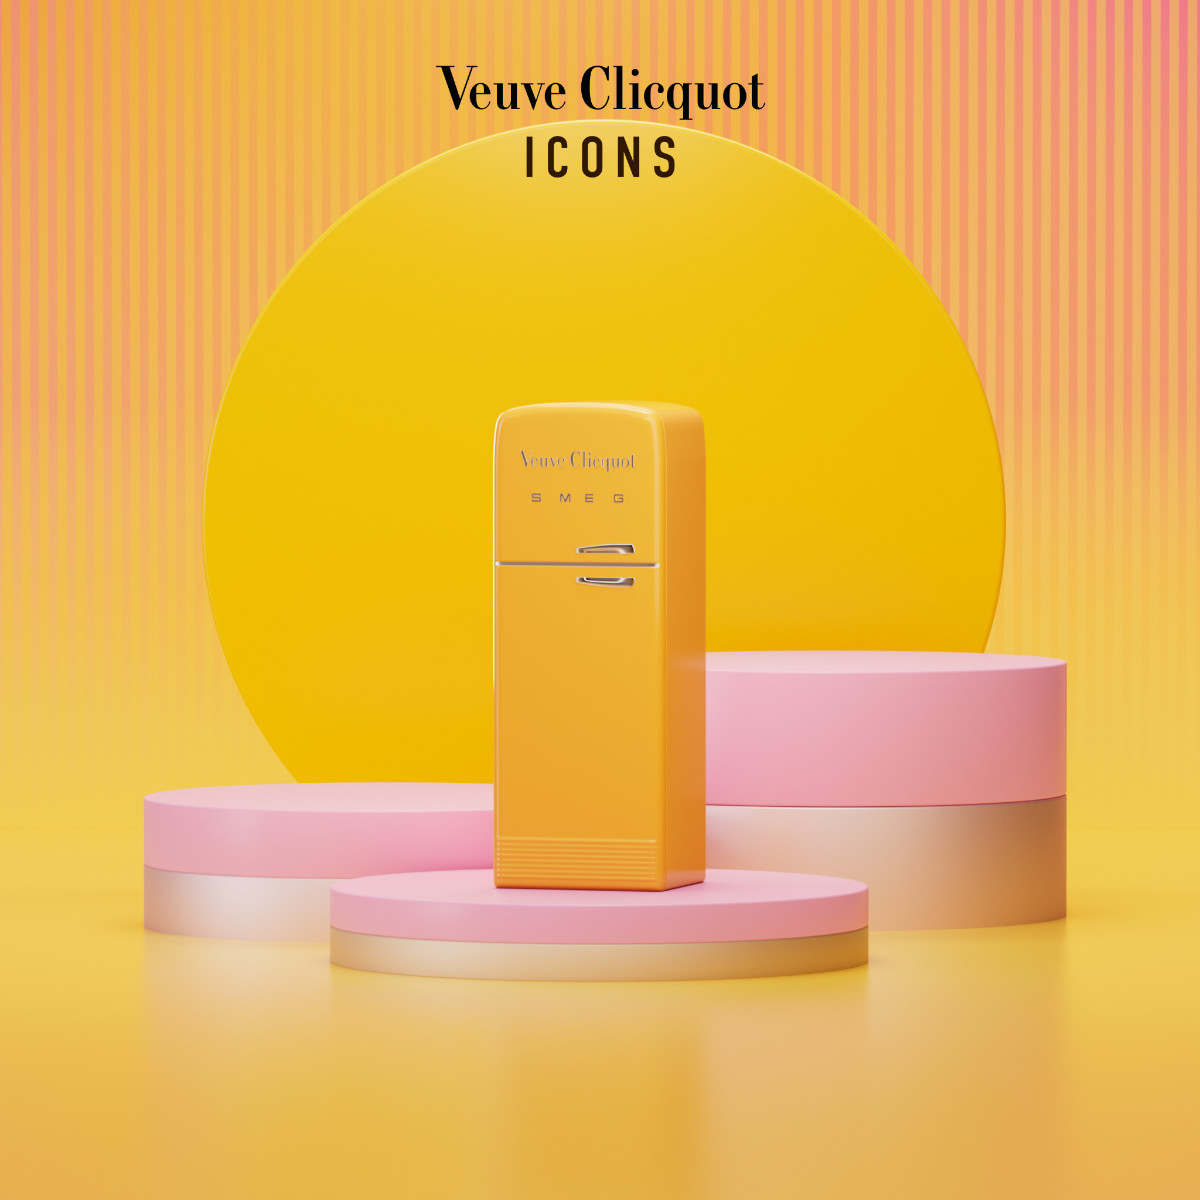 Veuve Clicquot Unveiled “THE ICONS”: An Exclusive Collection Of Four Of The House’s Most Emblematic